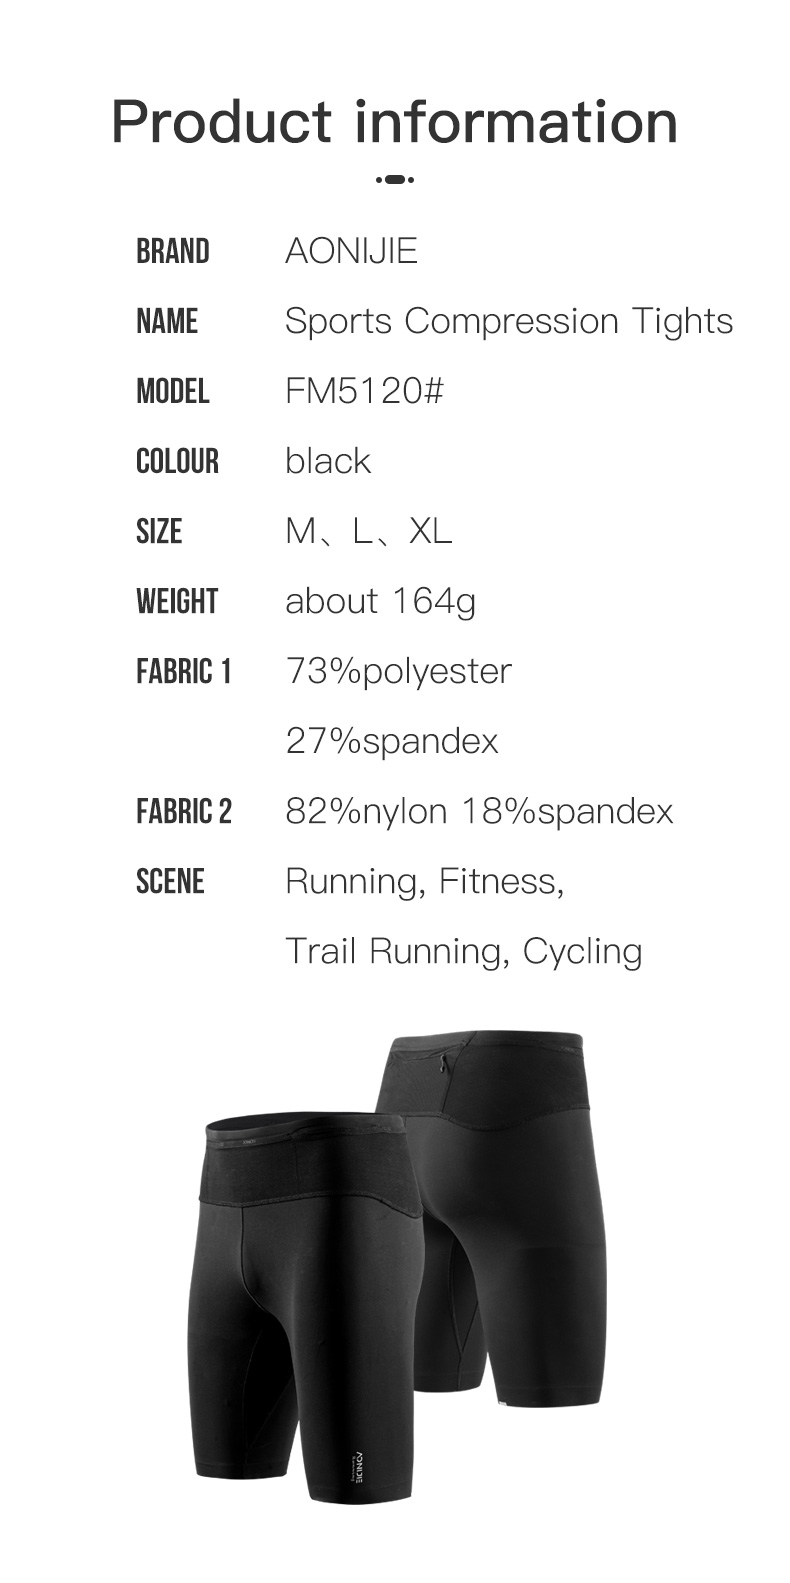 AONIJIE FM5120 Men Sports Compression Pants Lightweight Tight Running Pants  Moisture Absorption Wear-resistant Non-slip Black Riding Trousers